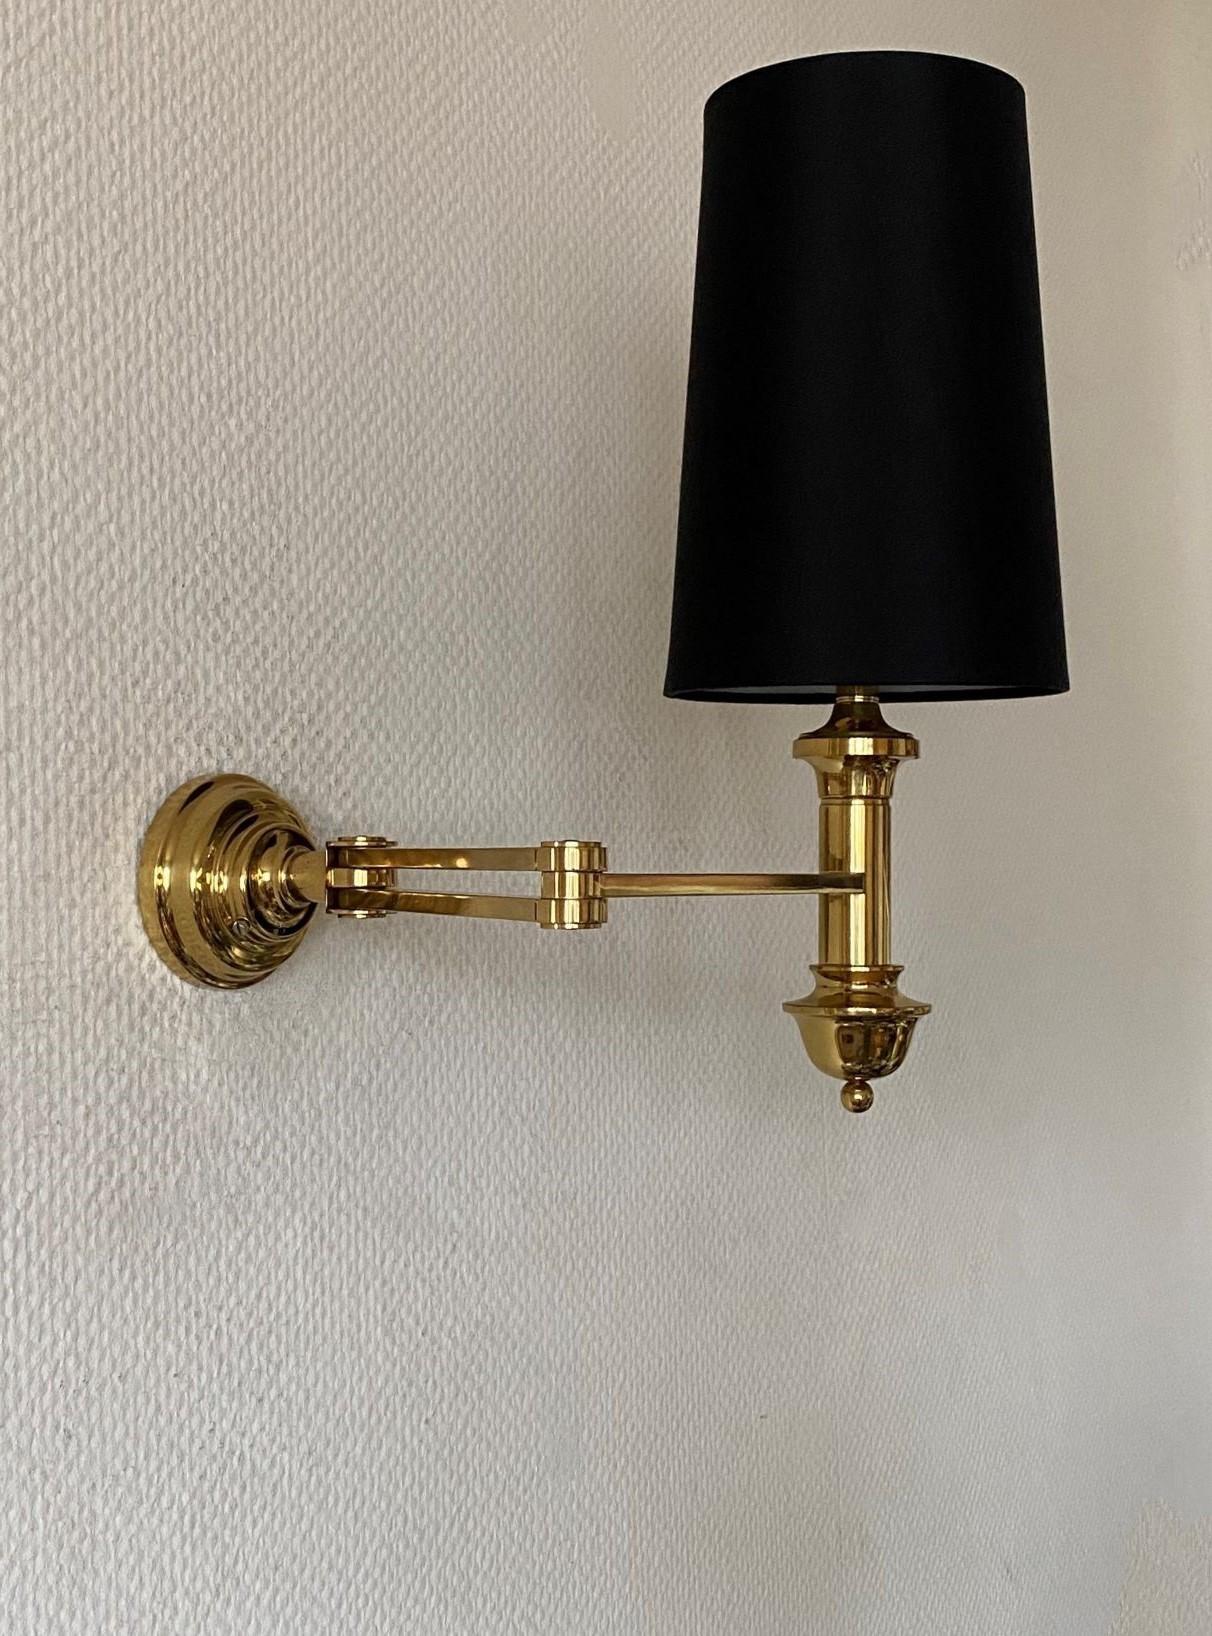 20th Century Pair of Maison Jansen Style Brass Swing Arm Wall Sconces Lights, 1960s For Sale